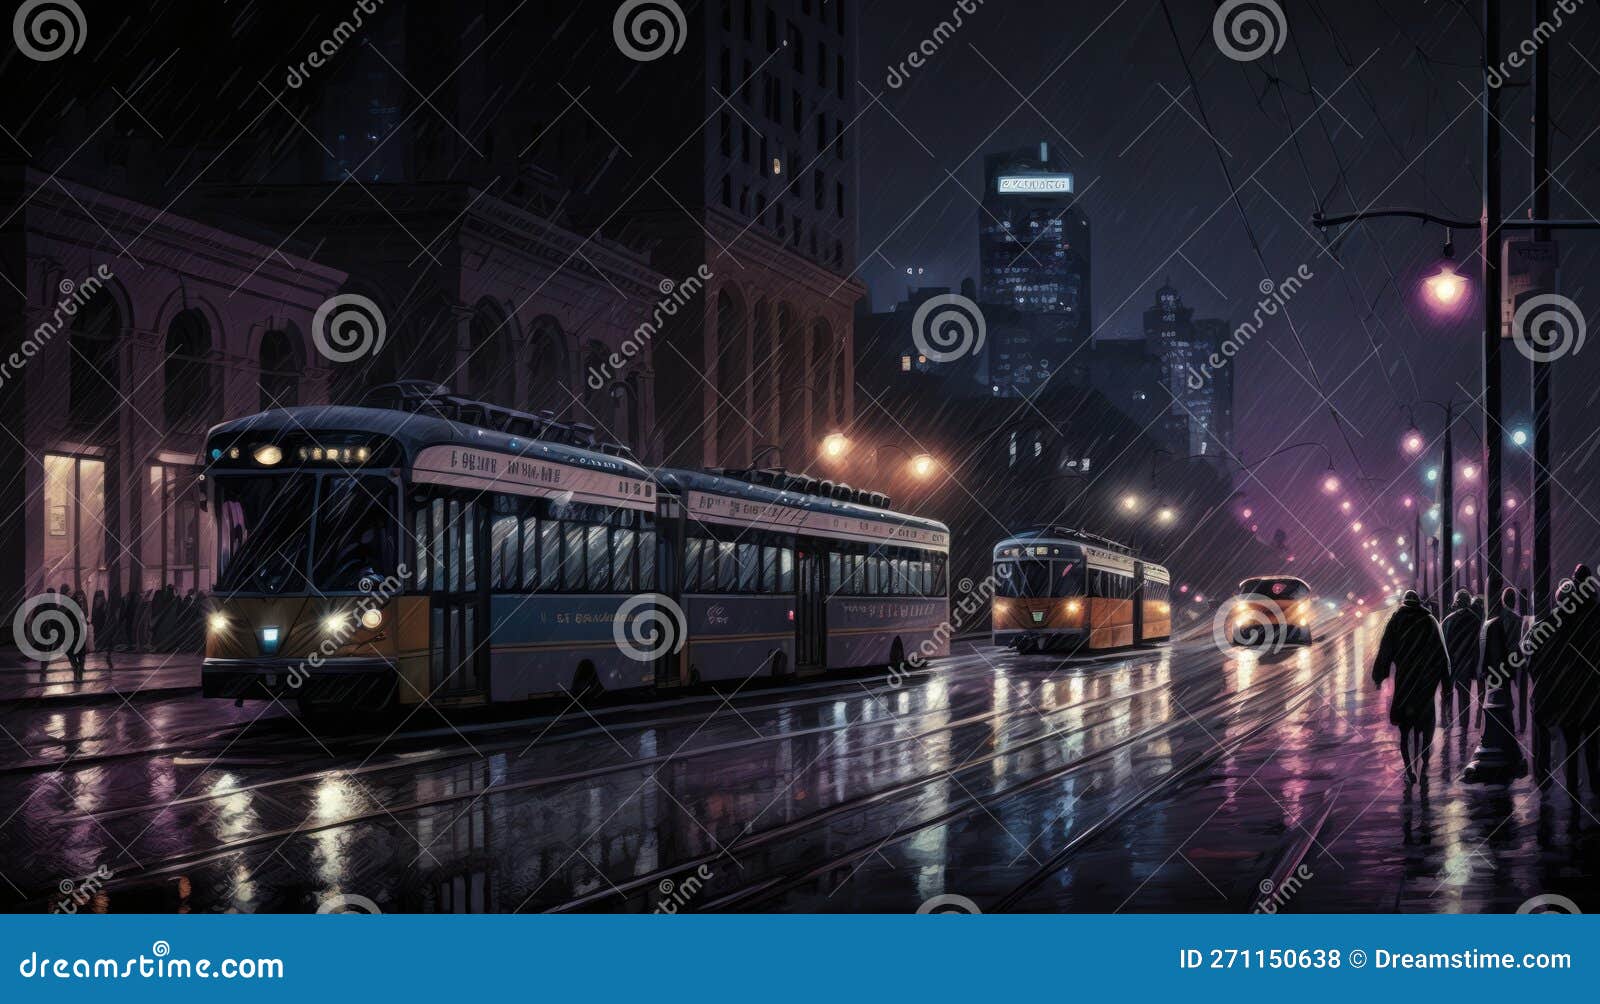 a night scene of yonge street in toronto featuring streetcars in motion